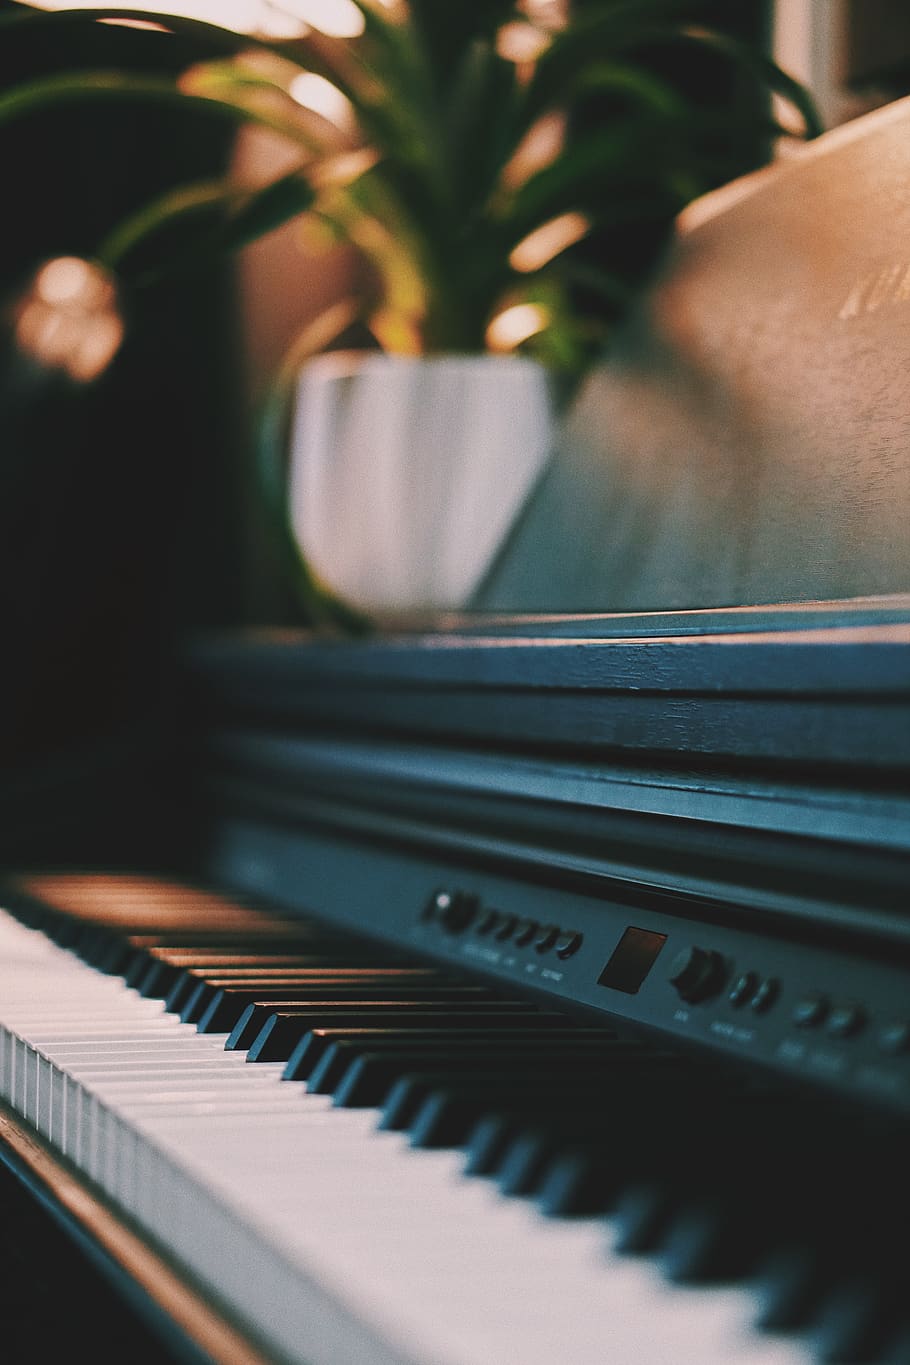 HD wallpaper: closeup photography of upright piano, musical instrument, leisure activities | Wallpaper Flare